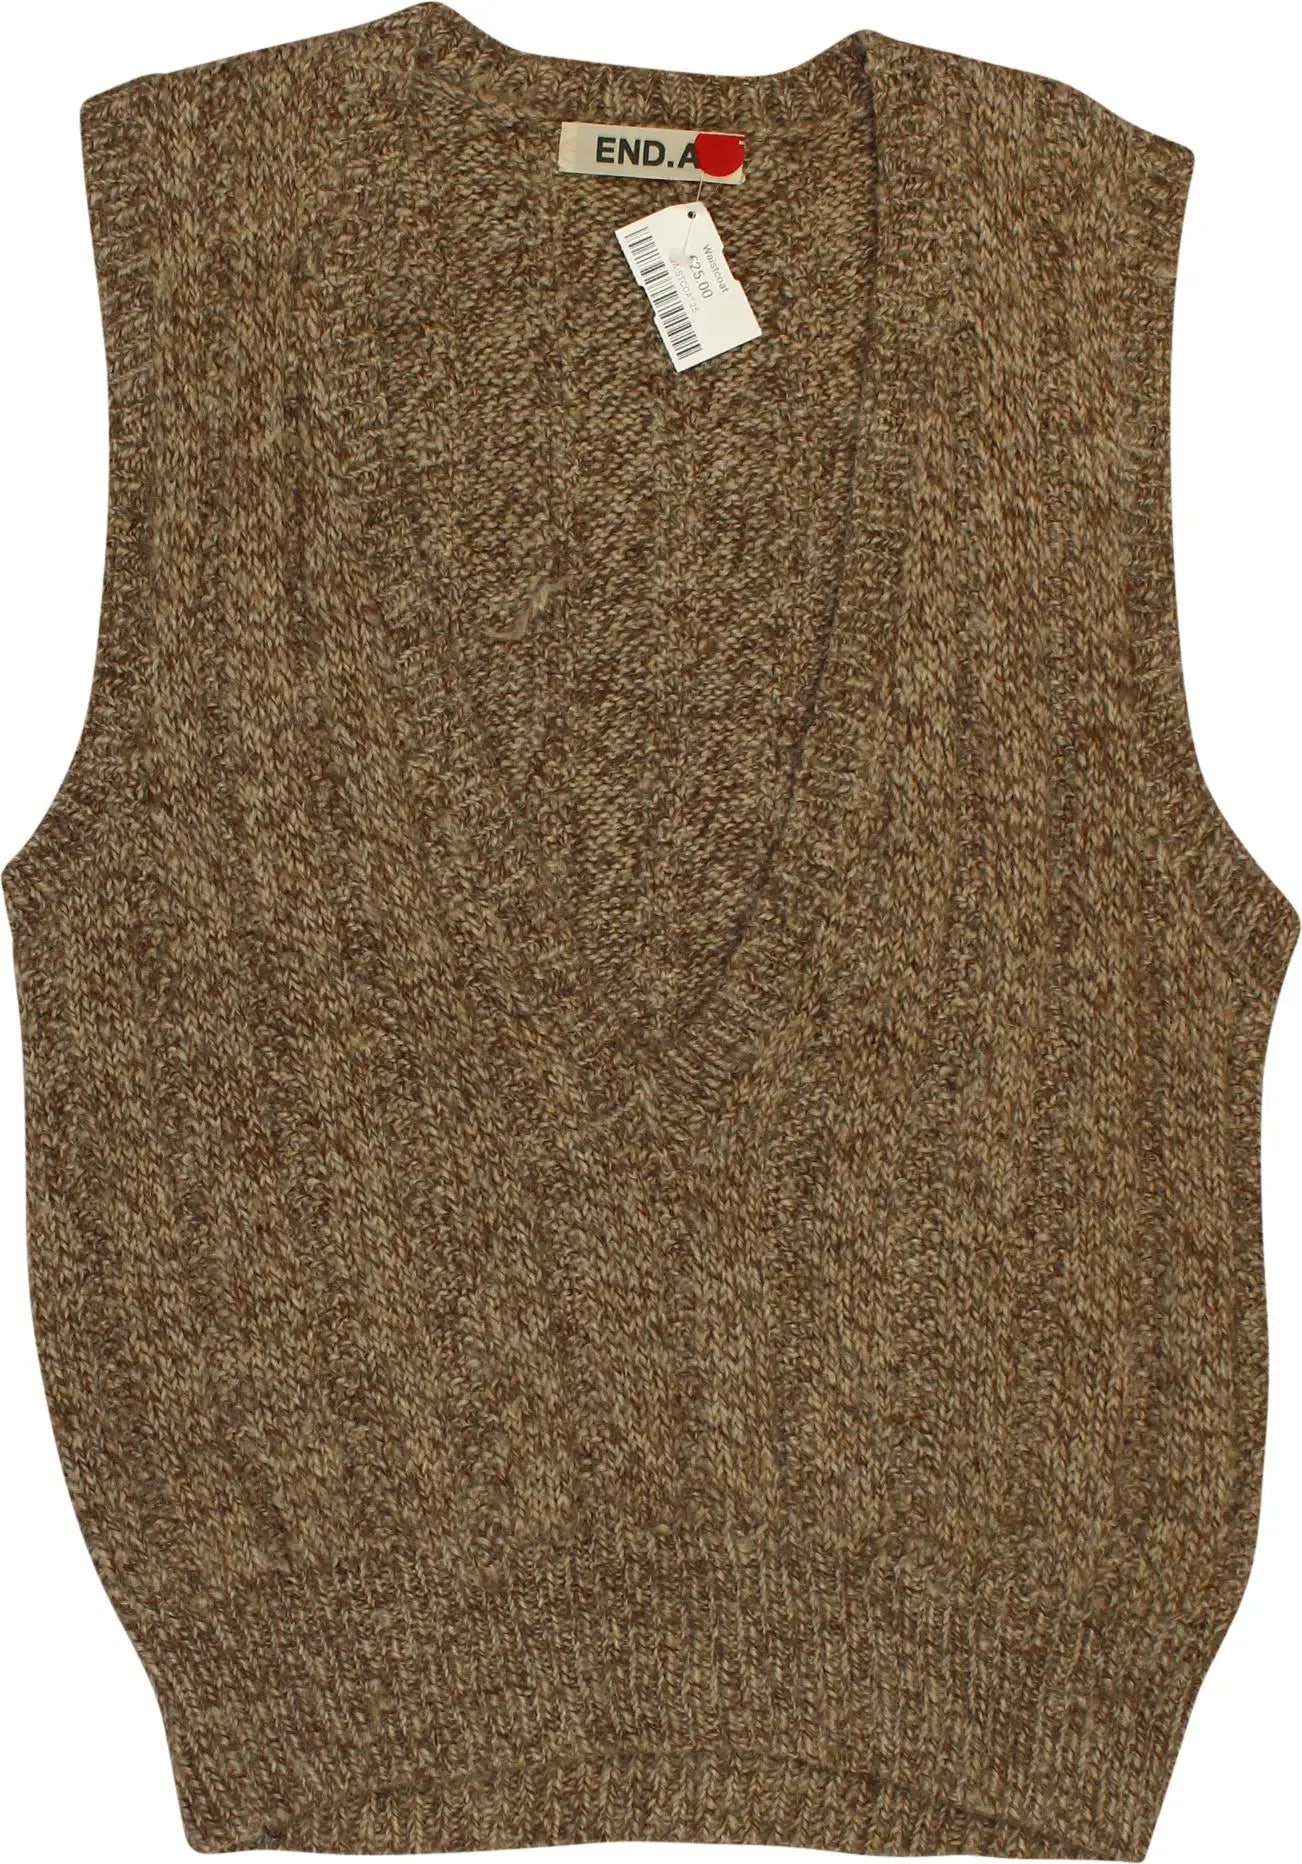 END.A - Knitted Vest- ThriftTale.com - Vintage and second handclothing